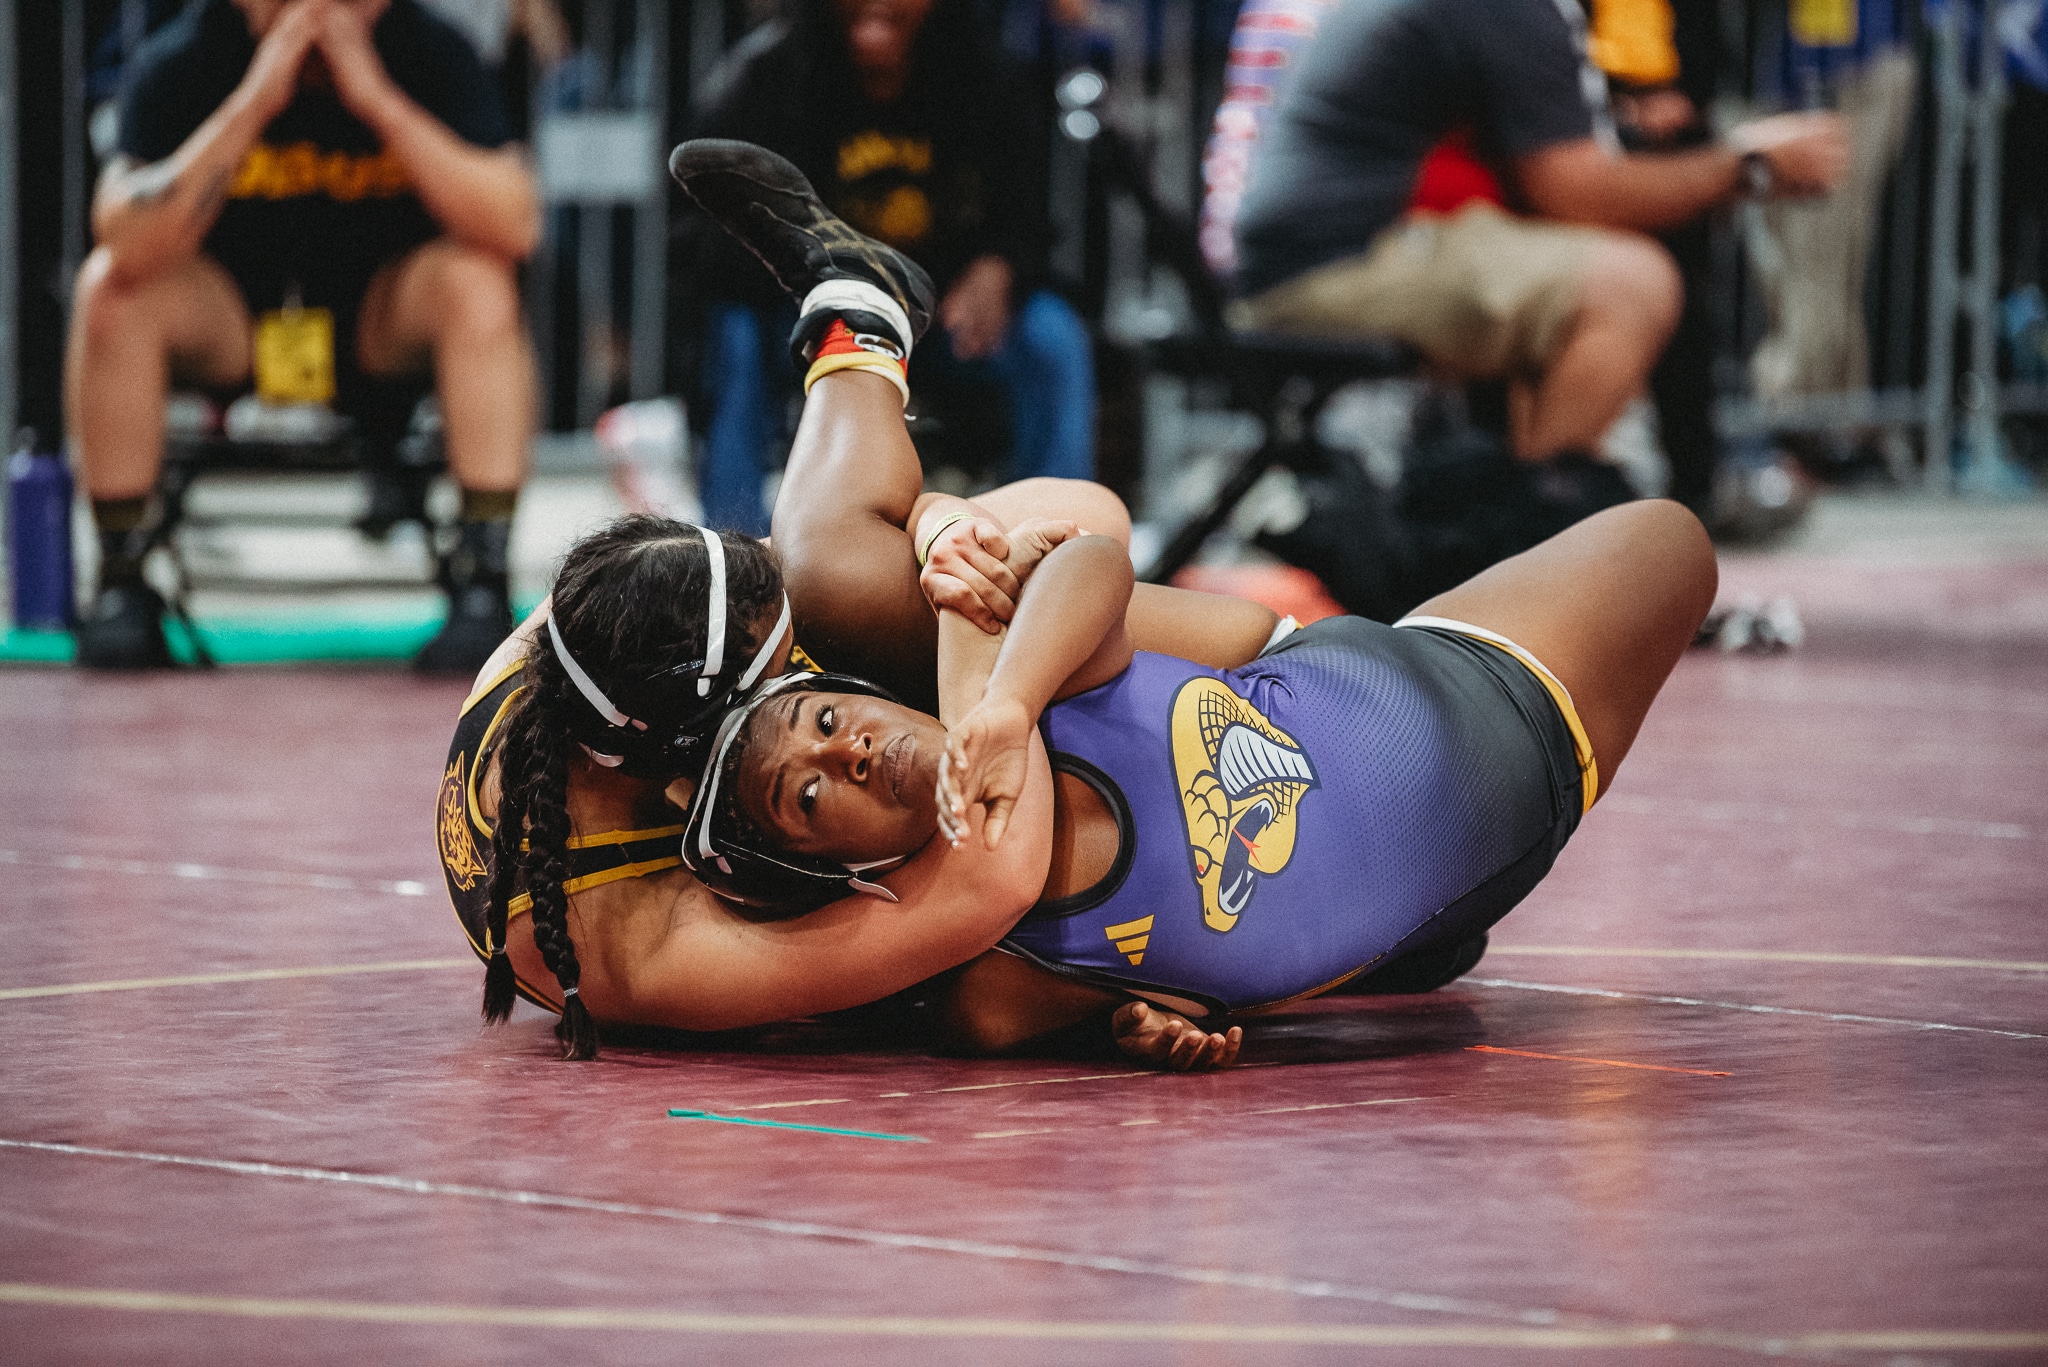 Grace Leota works to pin her opponent in her quarterfinals match against Mia Johnson from Fort Pierce Central. [Credit: Cynthia Leota]